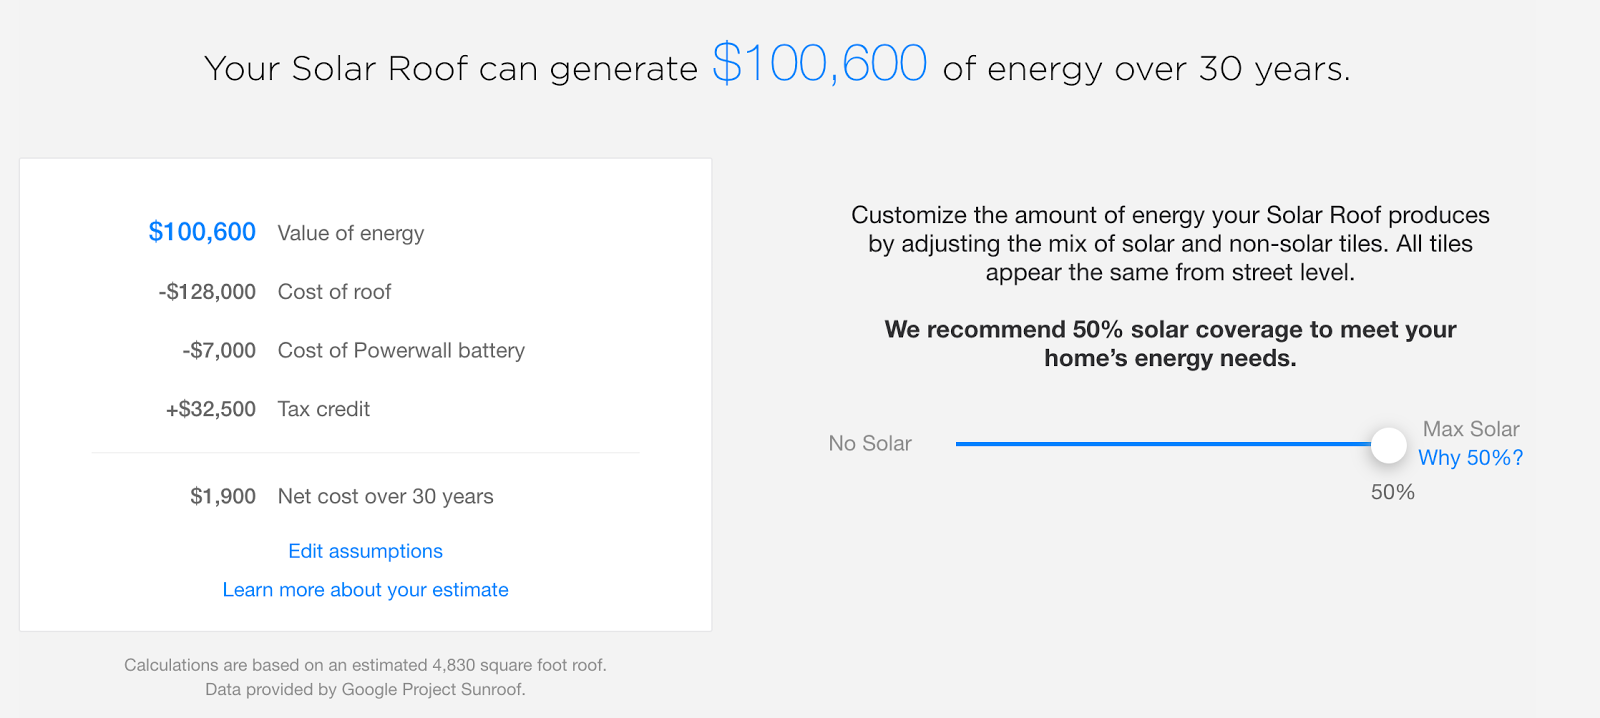 Cold Fusion Guy Tesla’s Solar Roof Pricing Estimate your home